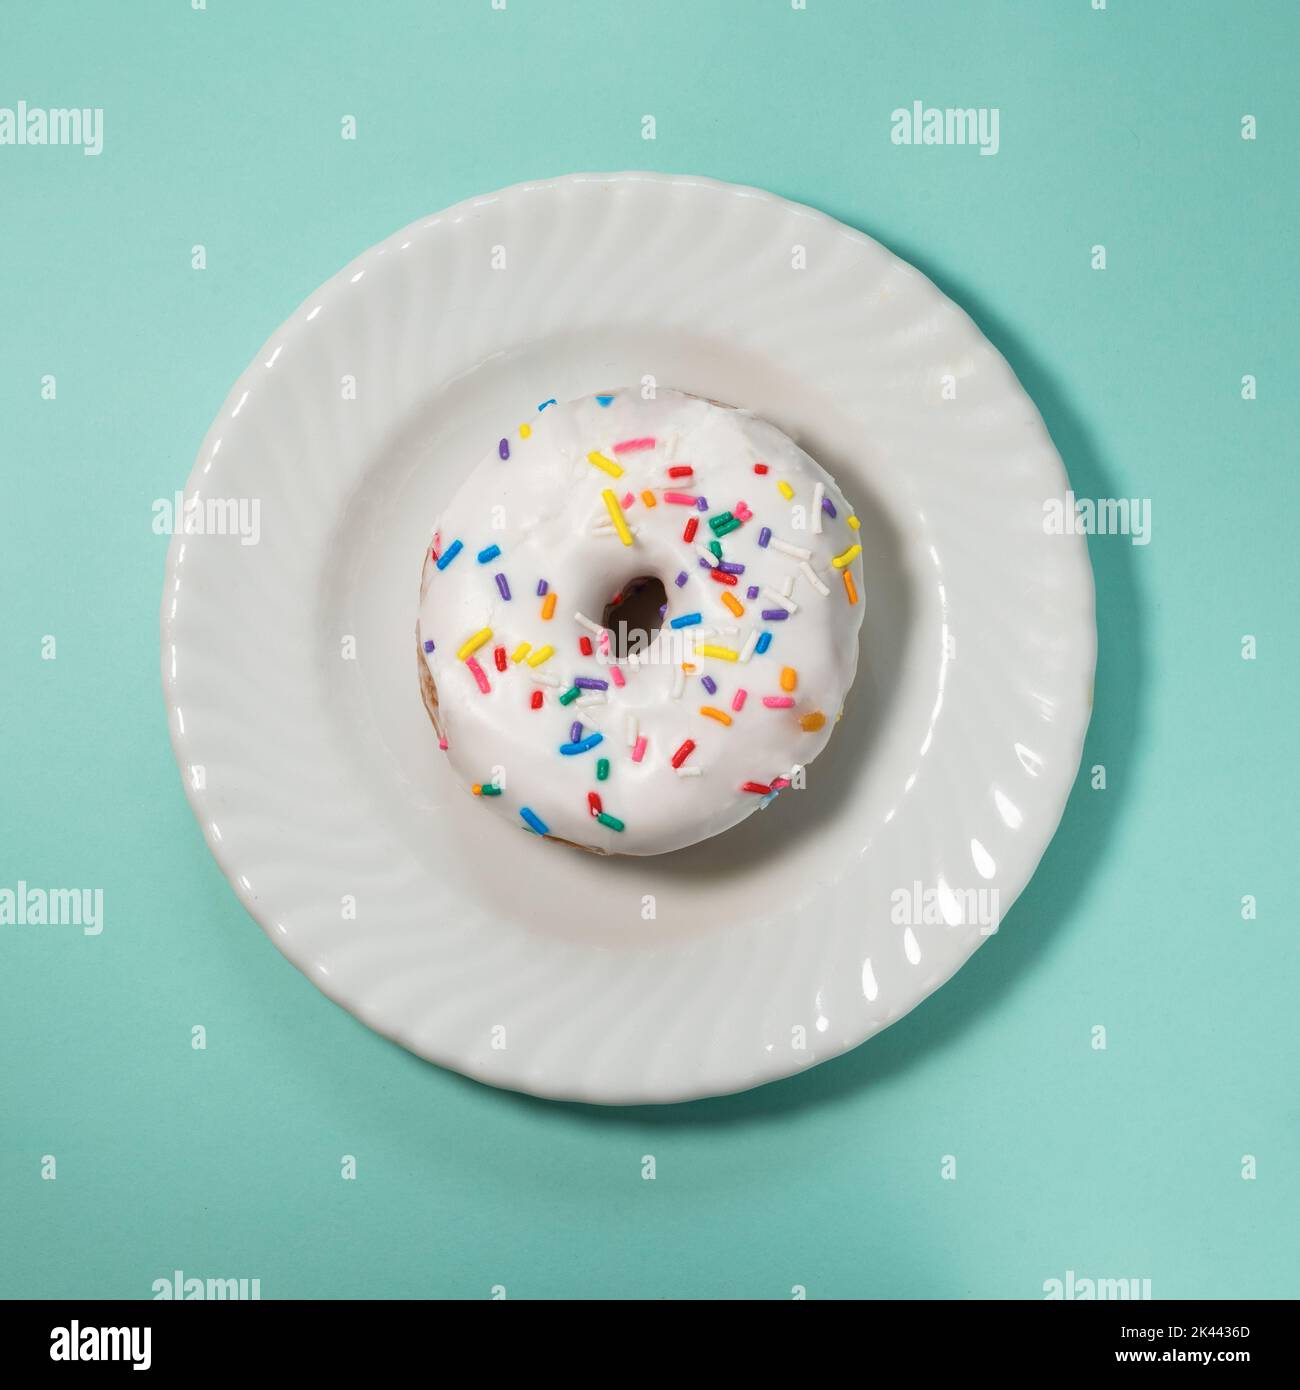 Overhead view of donut with white icing and sprinkles on white plate Stock Photo